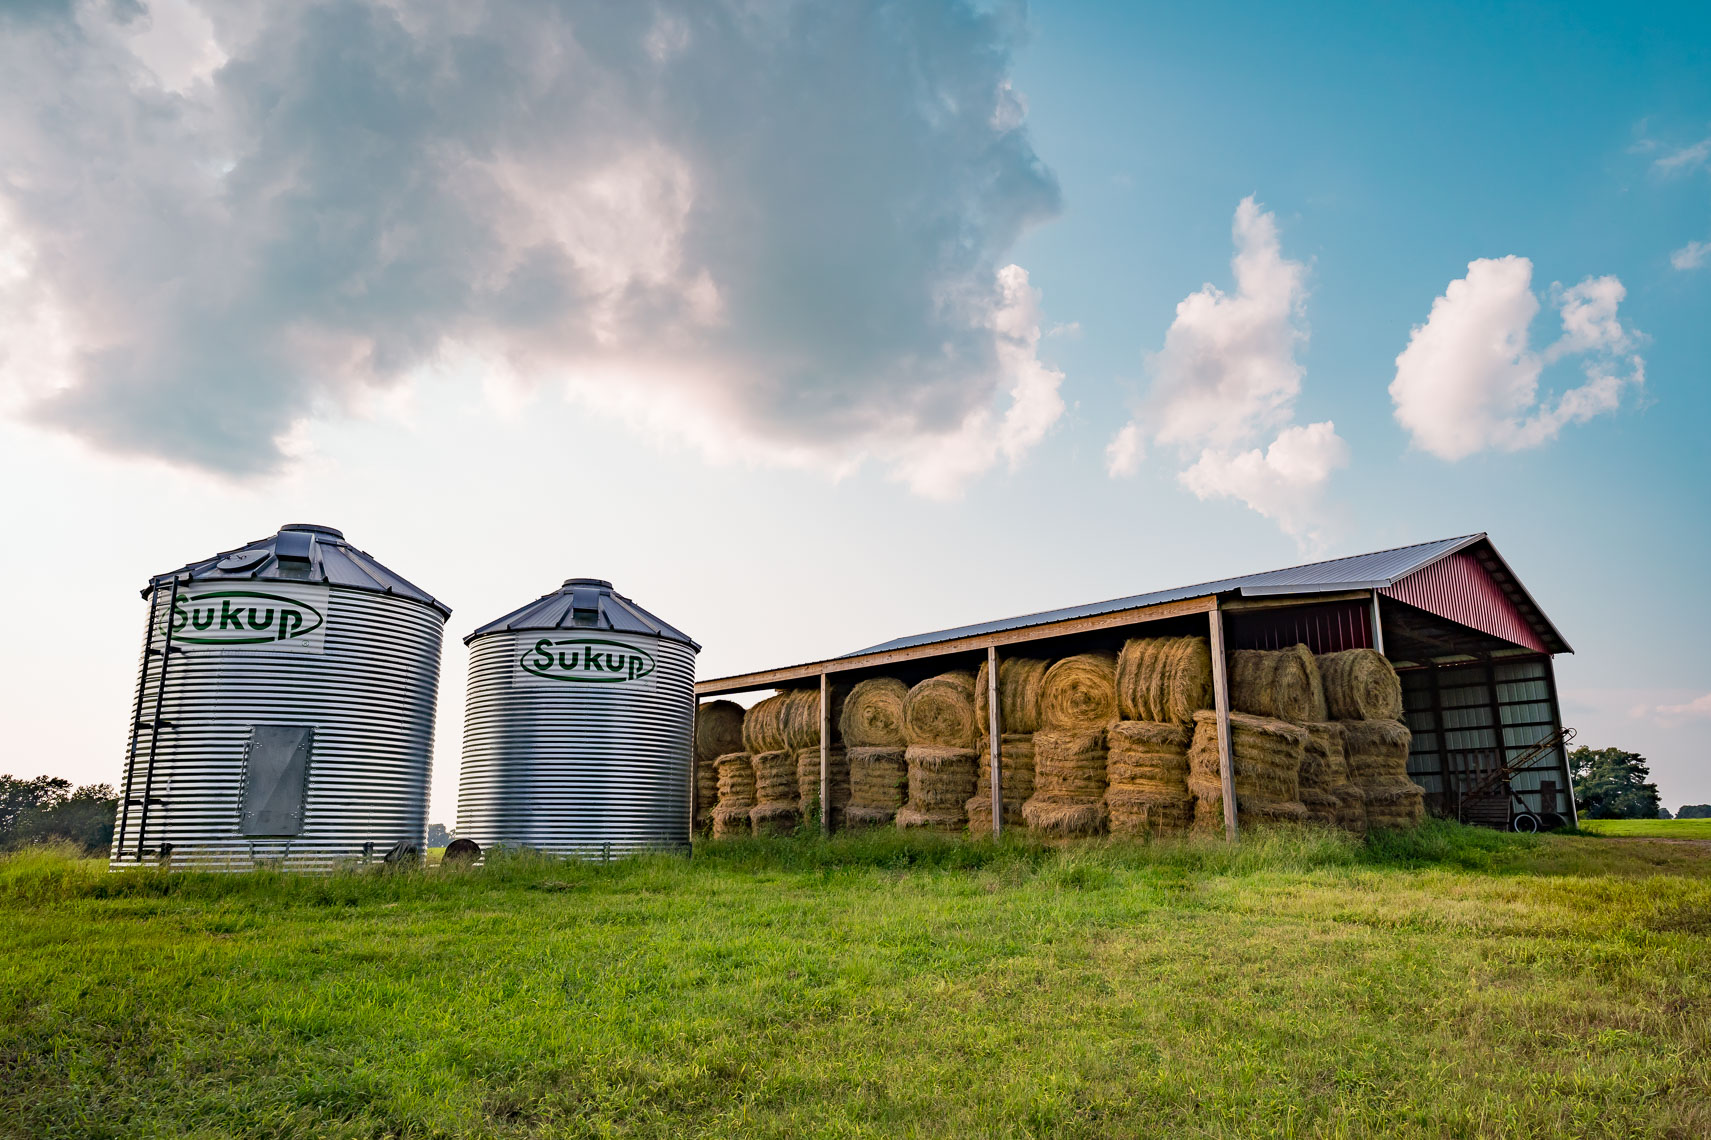 John_Burt_Iron_Horse_Farms_for_North_Carolina_Field_and_Family_20210811_by_Justin_Kase_Conder_0254_Retouched